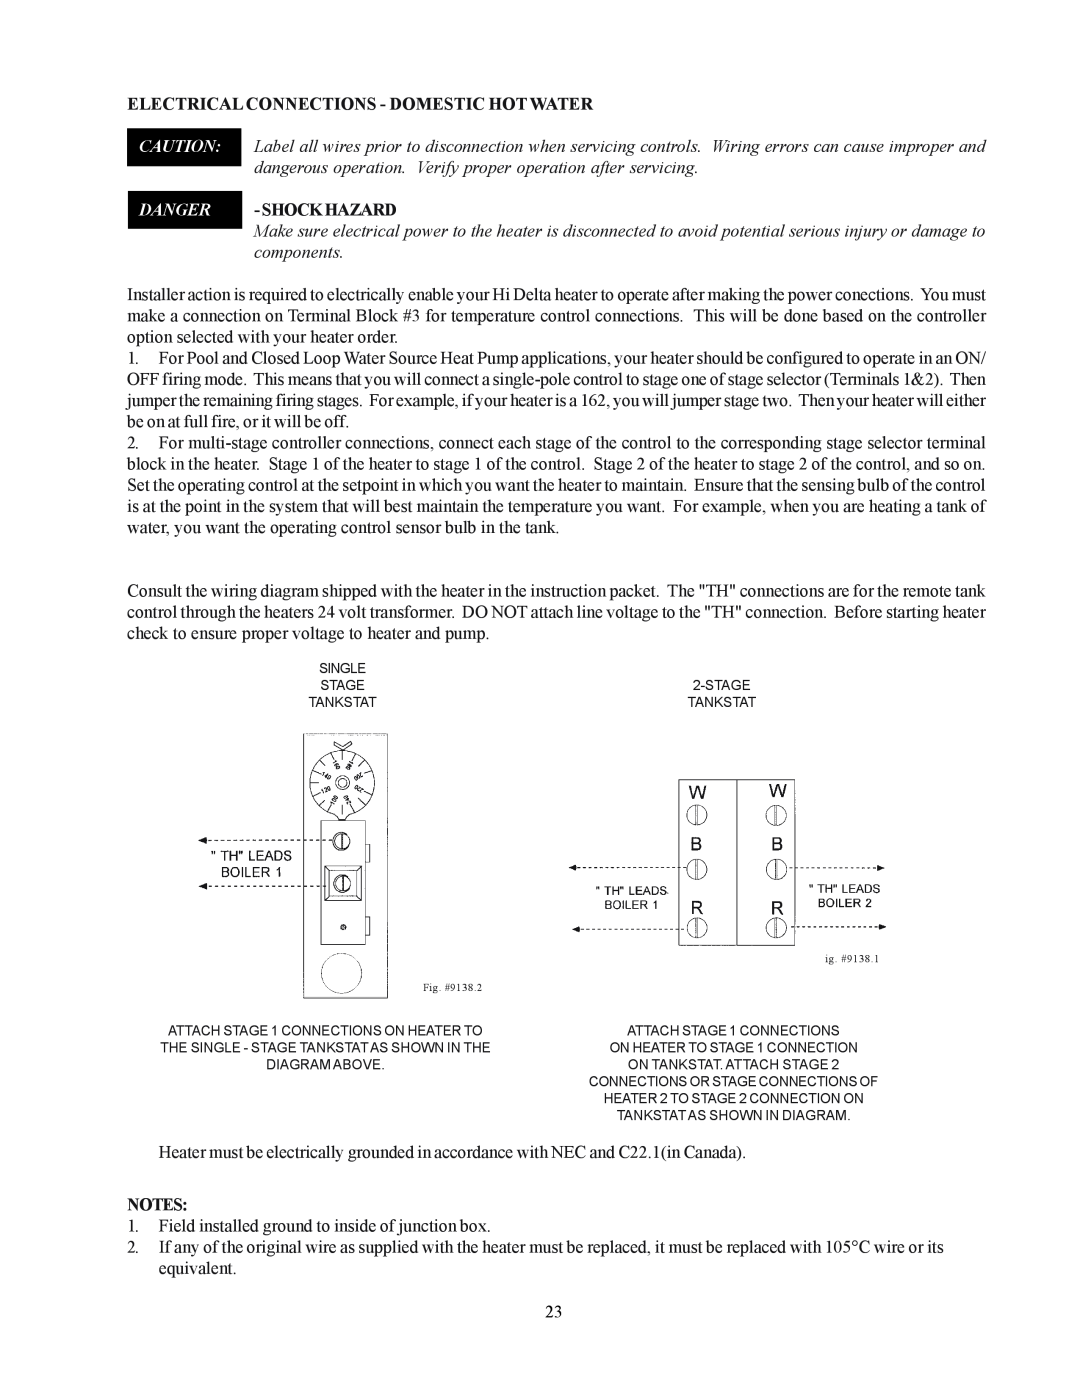 Raypak 122-322 installation instructions Electrical Connections - Domestic Hot Water, Danger, Shockhazard 